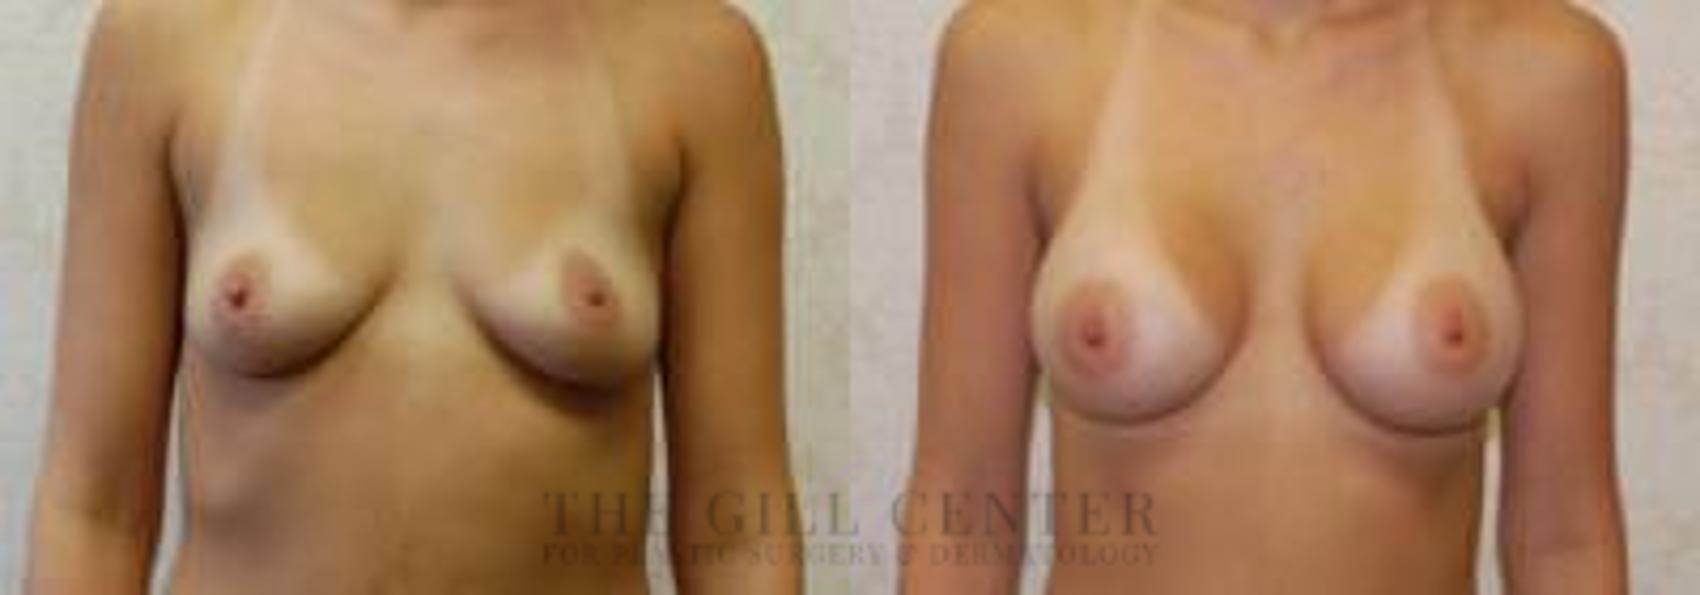 Breast Augmentation Case 39 Before & After Front | The Woodlands, TX | The Gill Center for Plastic Surgery and Dermatology